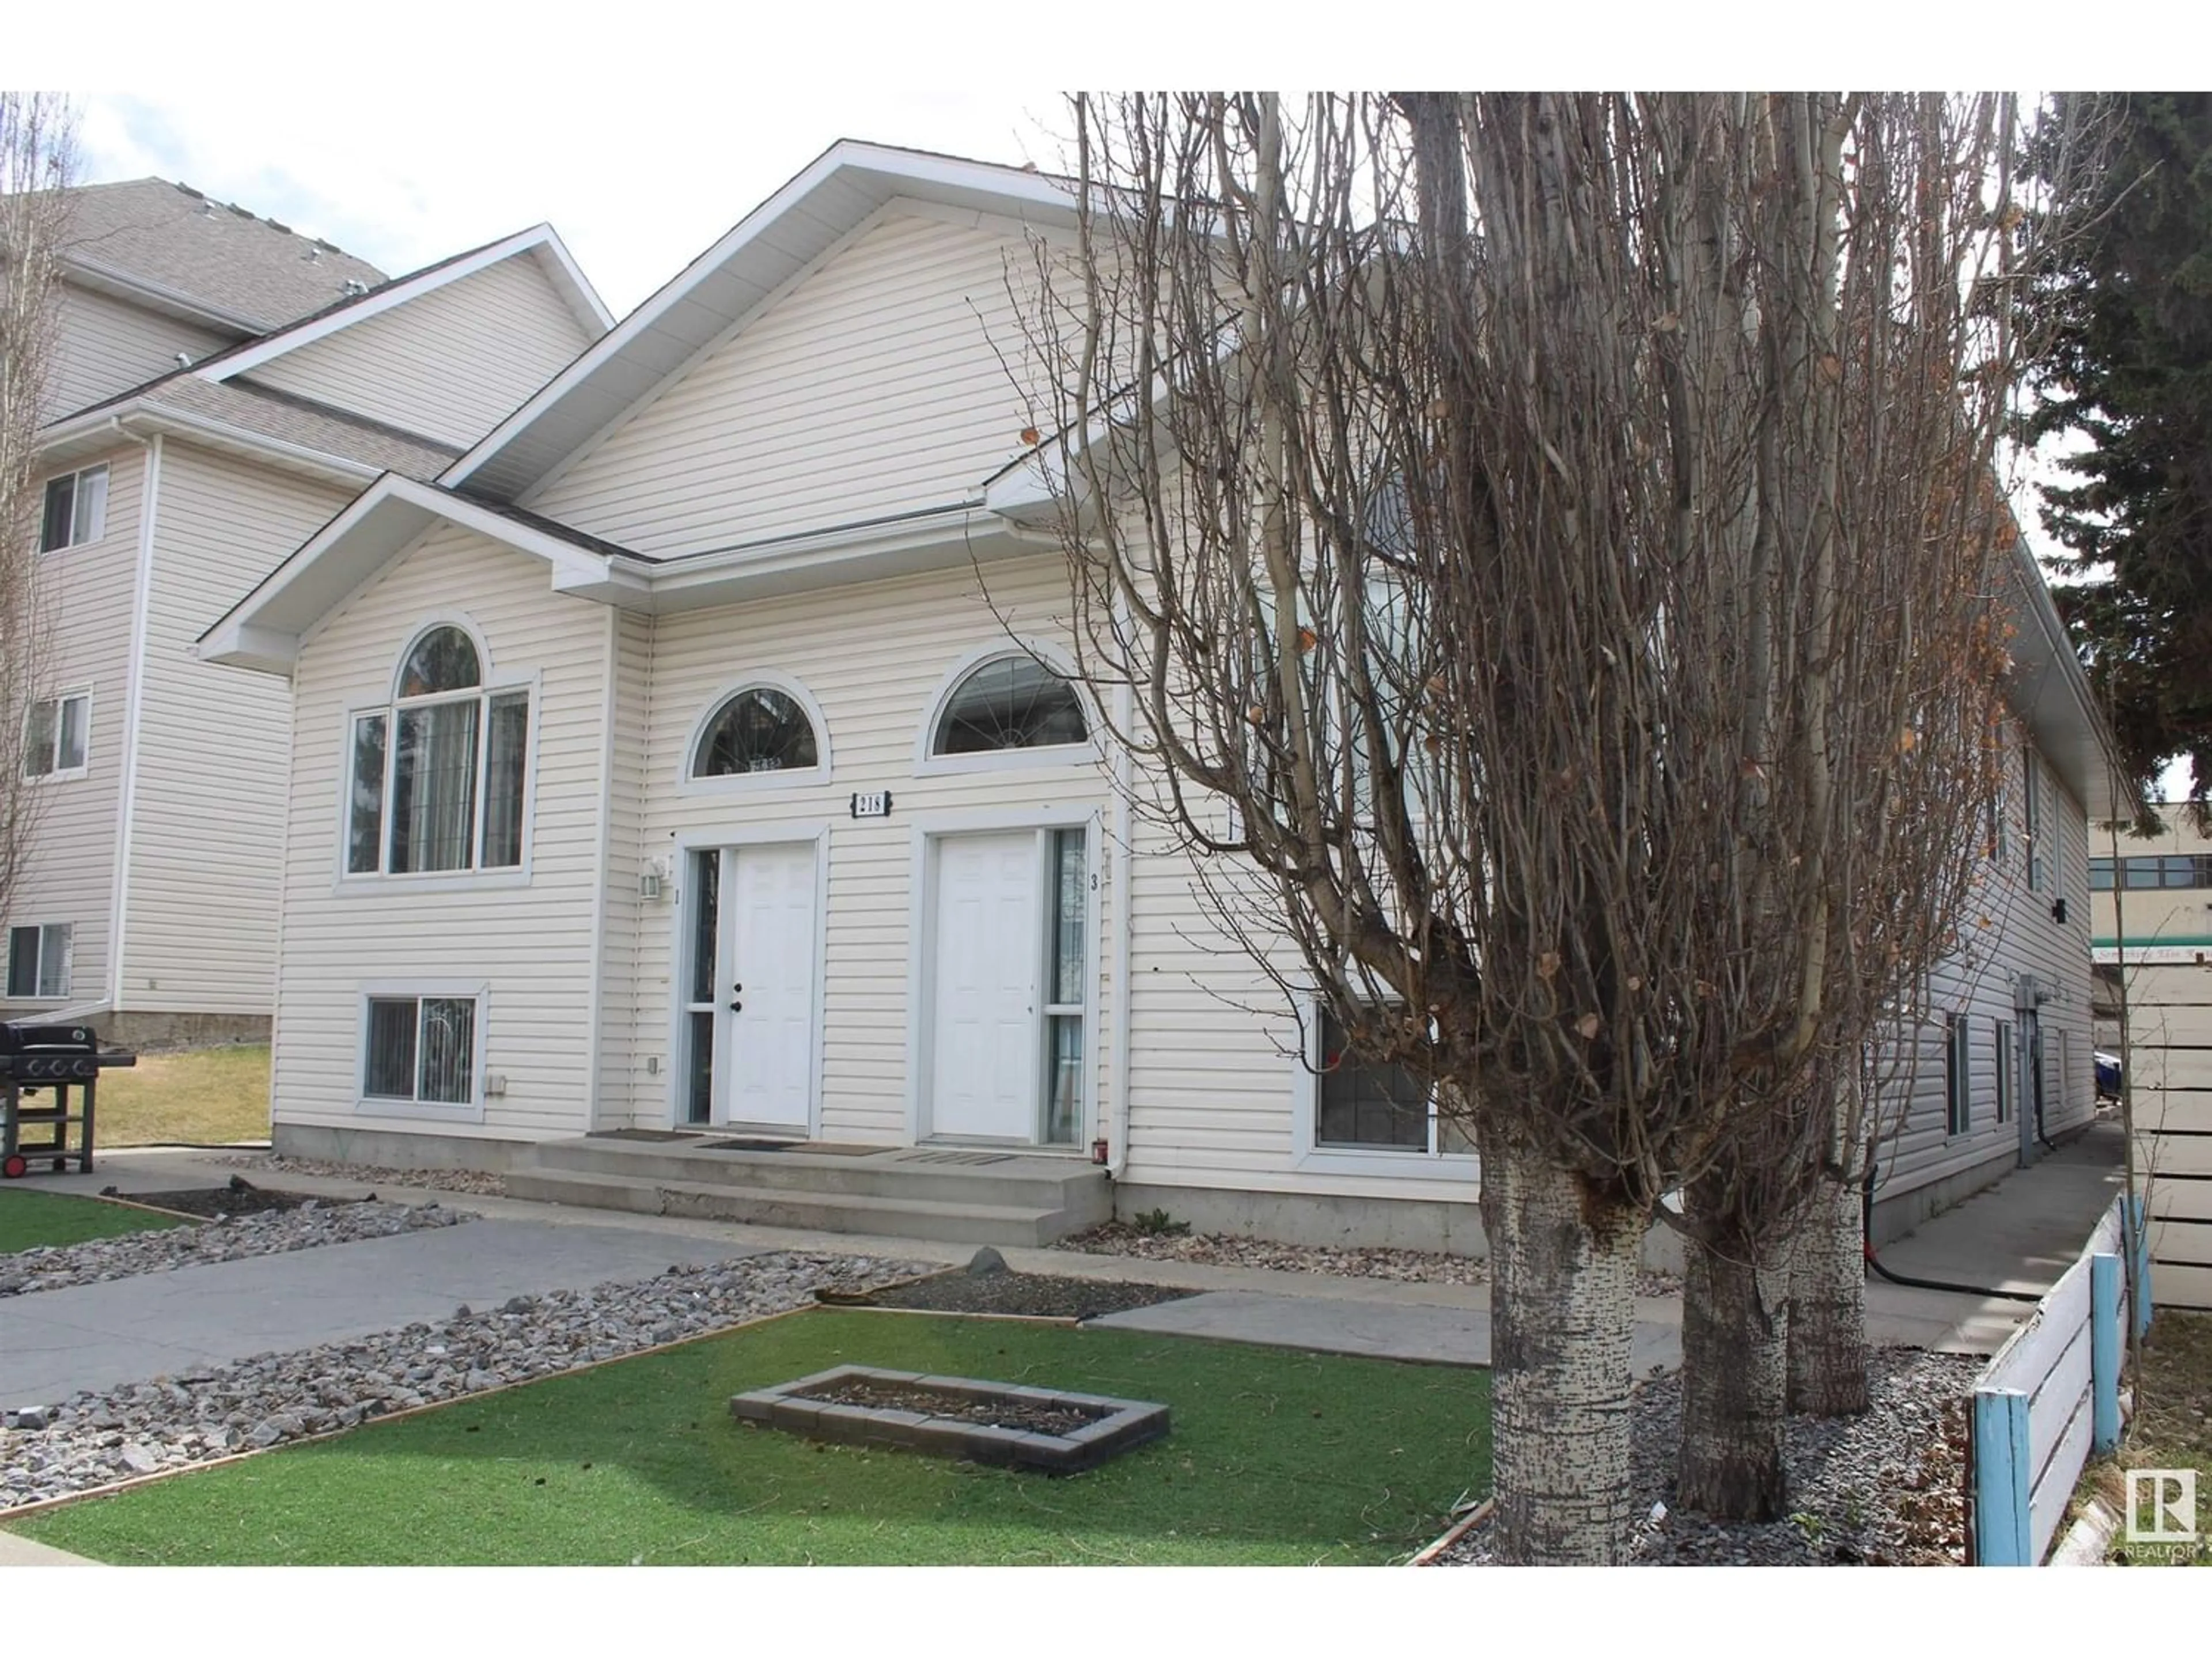 Outside view for 218 church RD, Spruce Grove Alberta T7X2K3